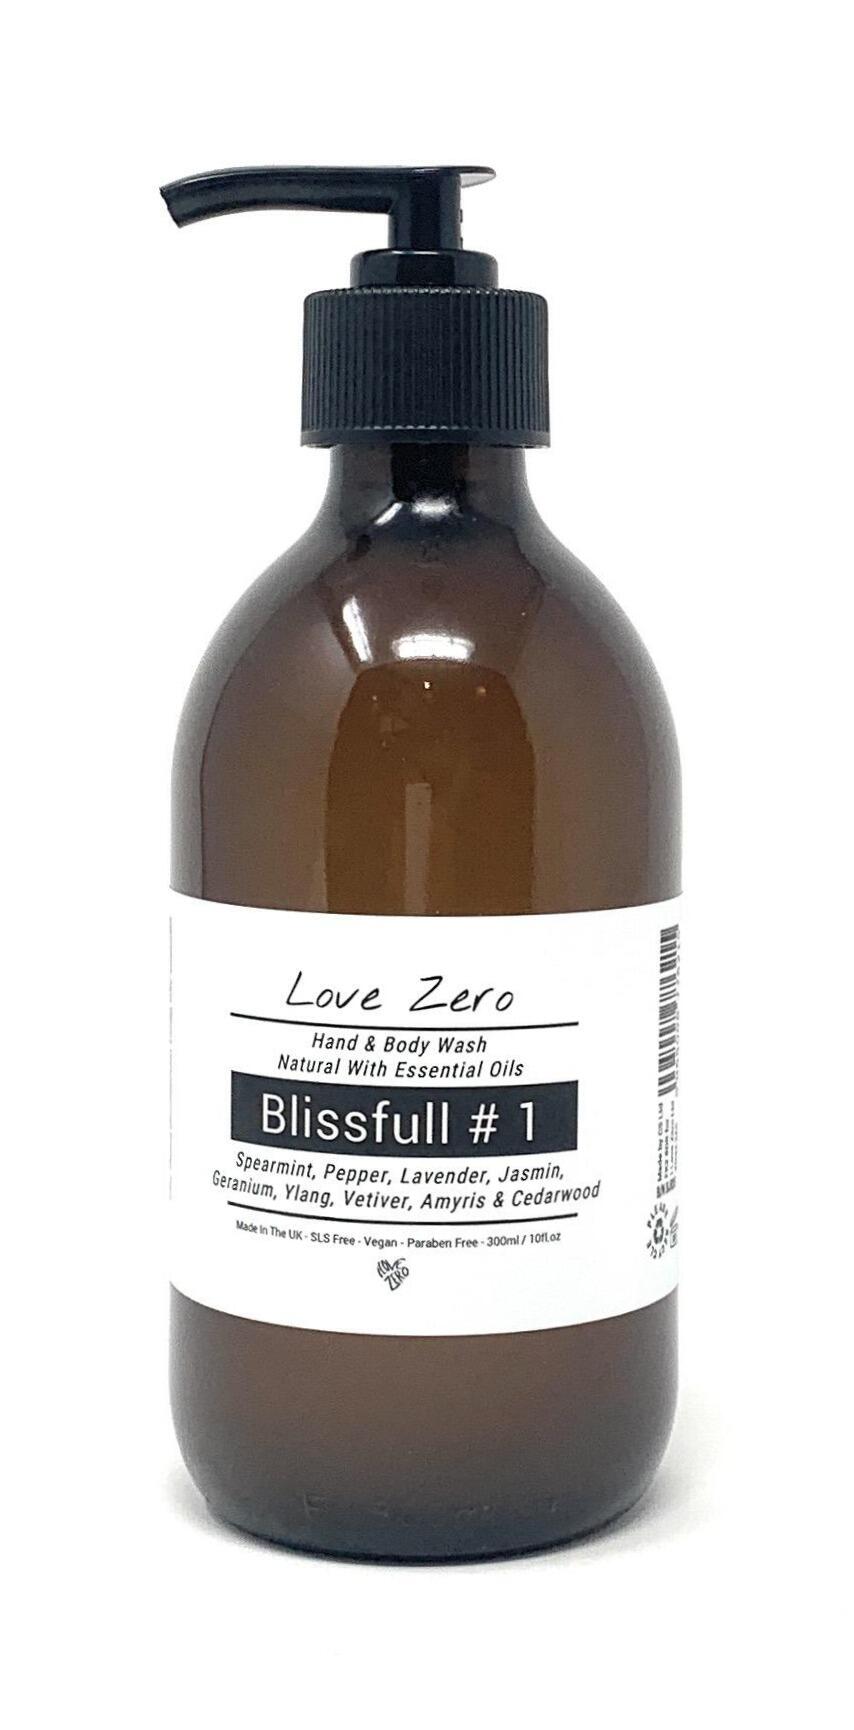 Blissfull Number 1 - Hand and Body Wash 300ml